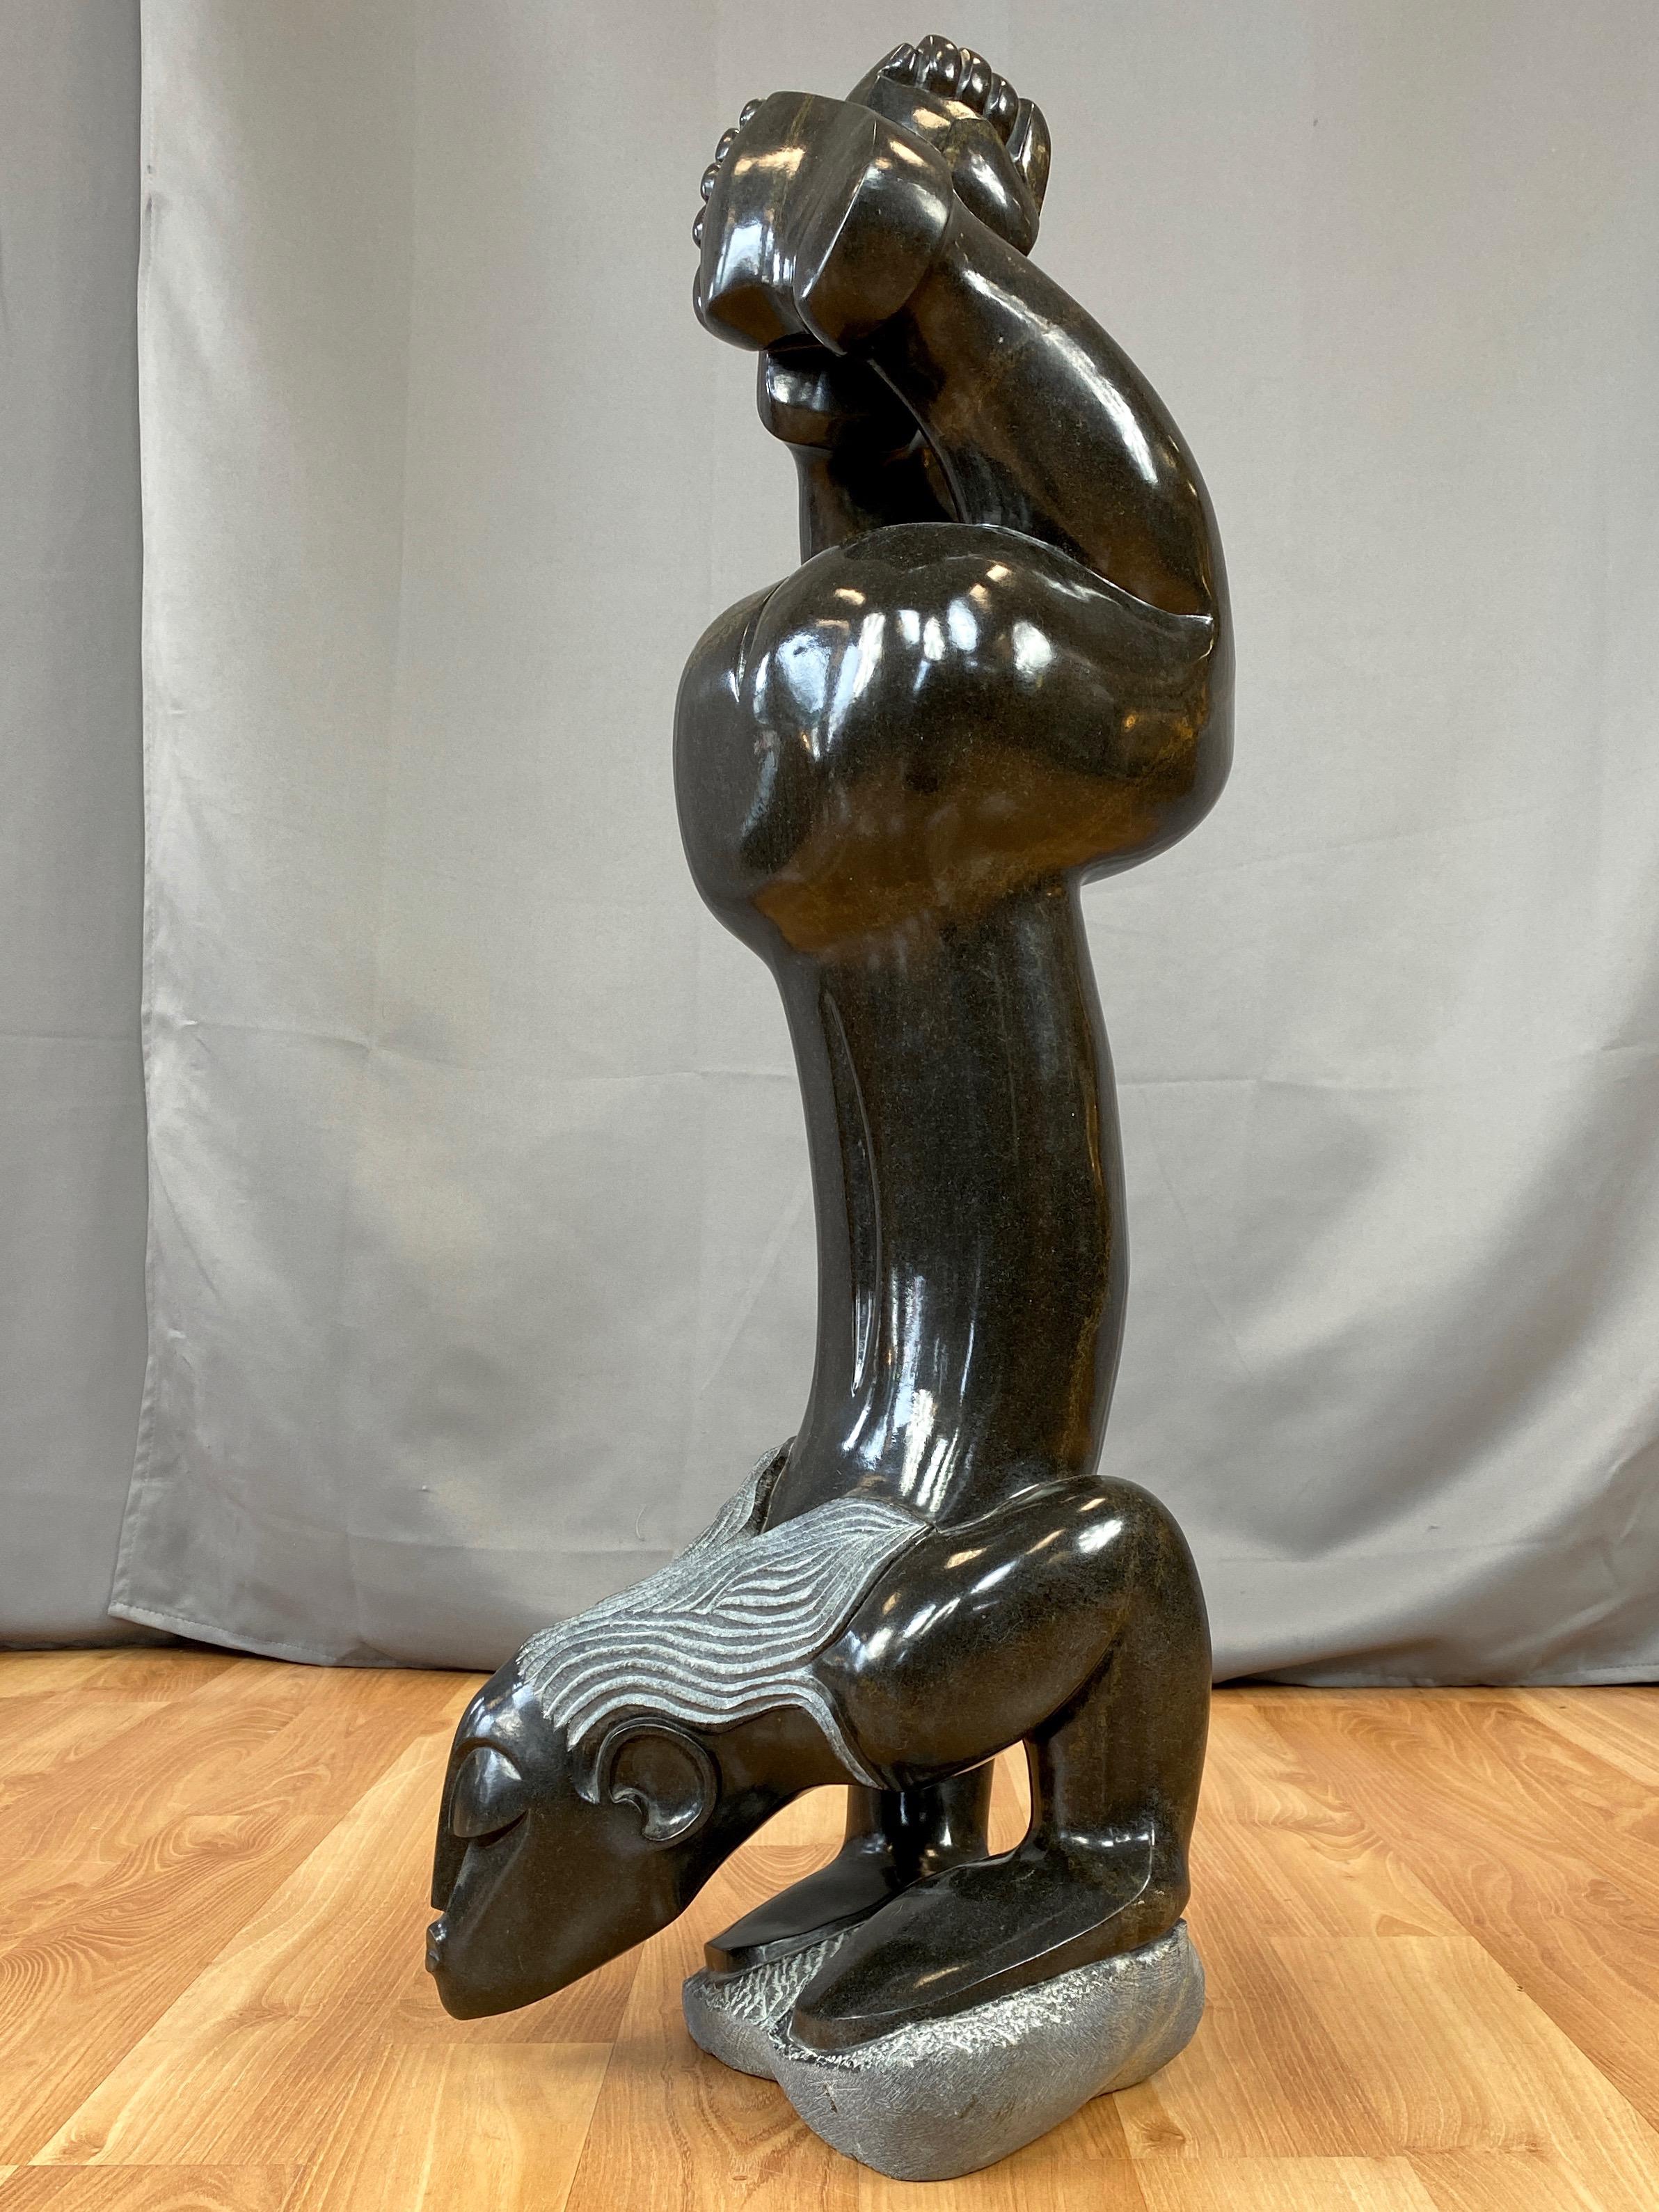 A very impressive signed Shona sculpture in springstone titled “Exercising” by important Arizona-based Zimbabwean artist Gedion Nyanhongo.

Exquisitely rendered and reverent depiction of the female form exudes serene strength and Zimbabwe’s singular